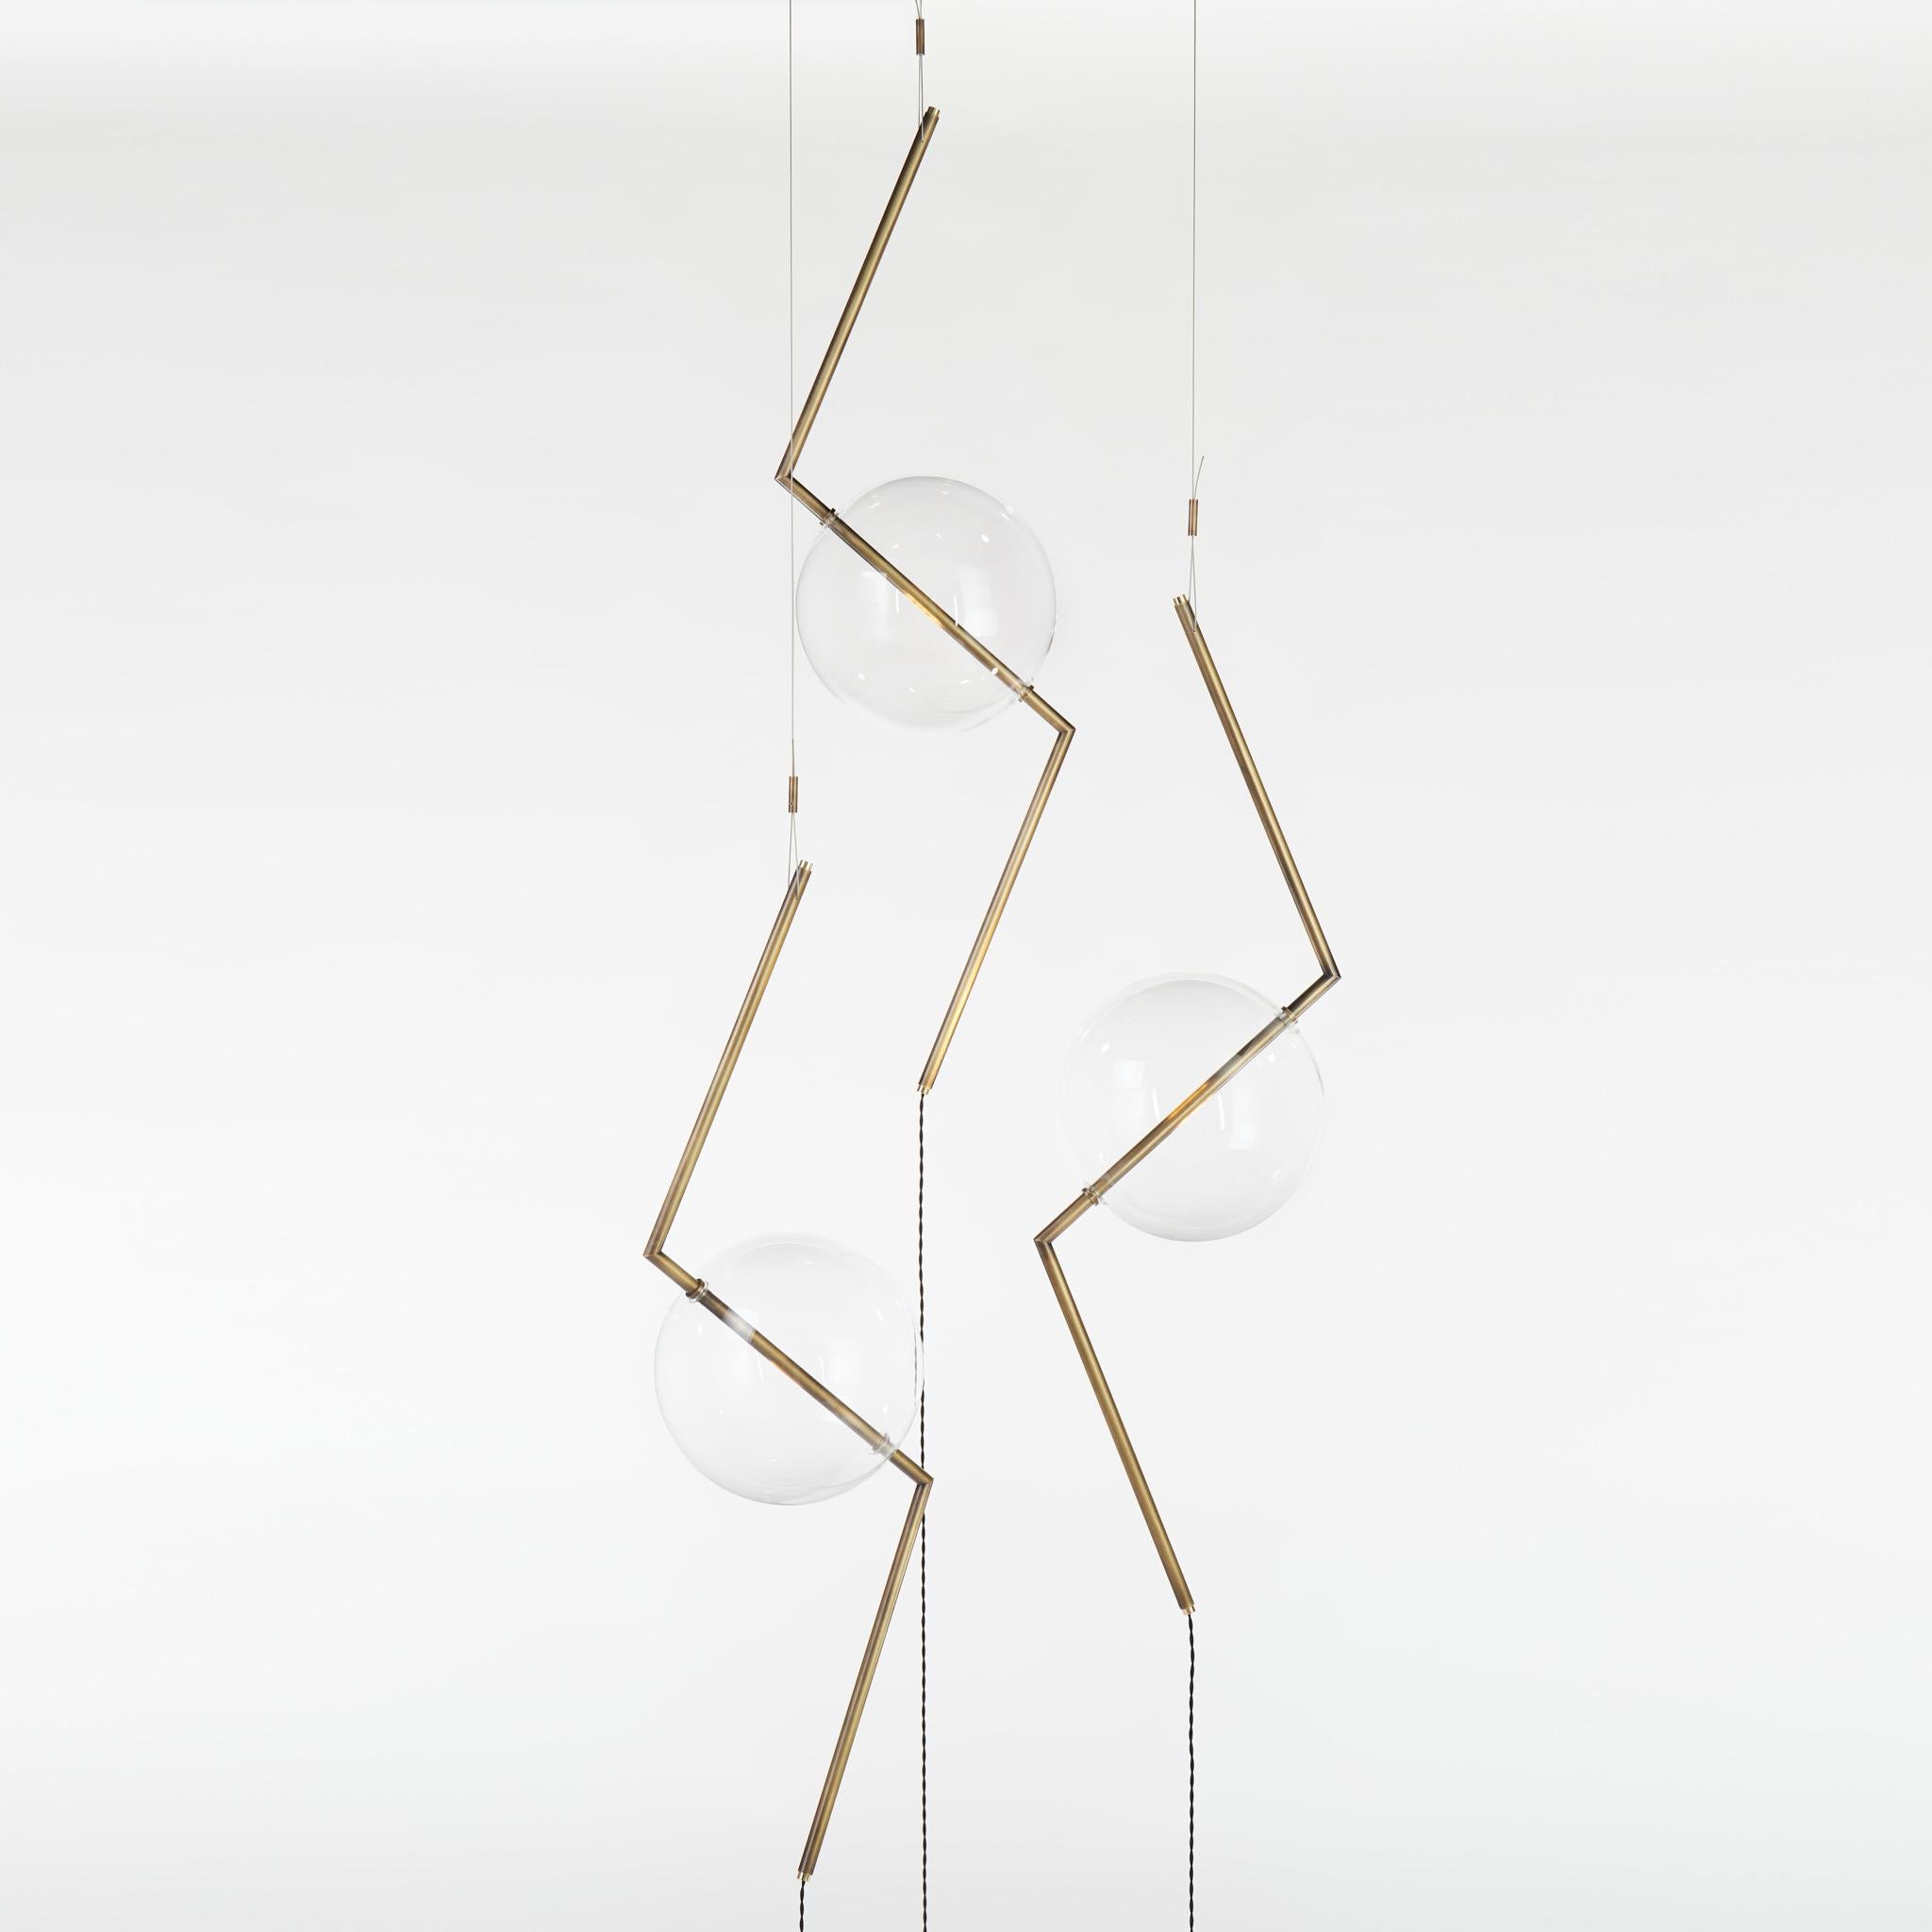 Somewhere between a suspension light and a floor lamp, Fulmine (thunderbolt) engages with gravity in an innovative and playful way. The central form, stretched from each end, seems to resist its own, emerging, lightning-bolt zig-zag Form, creating